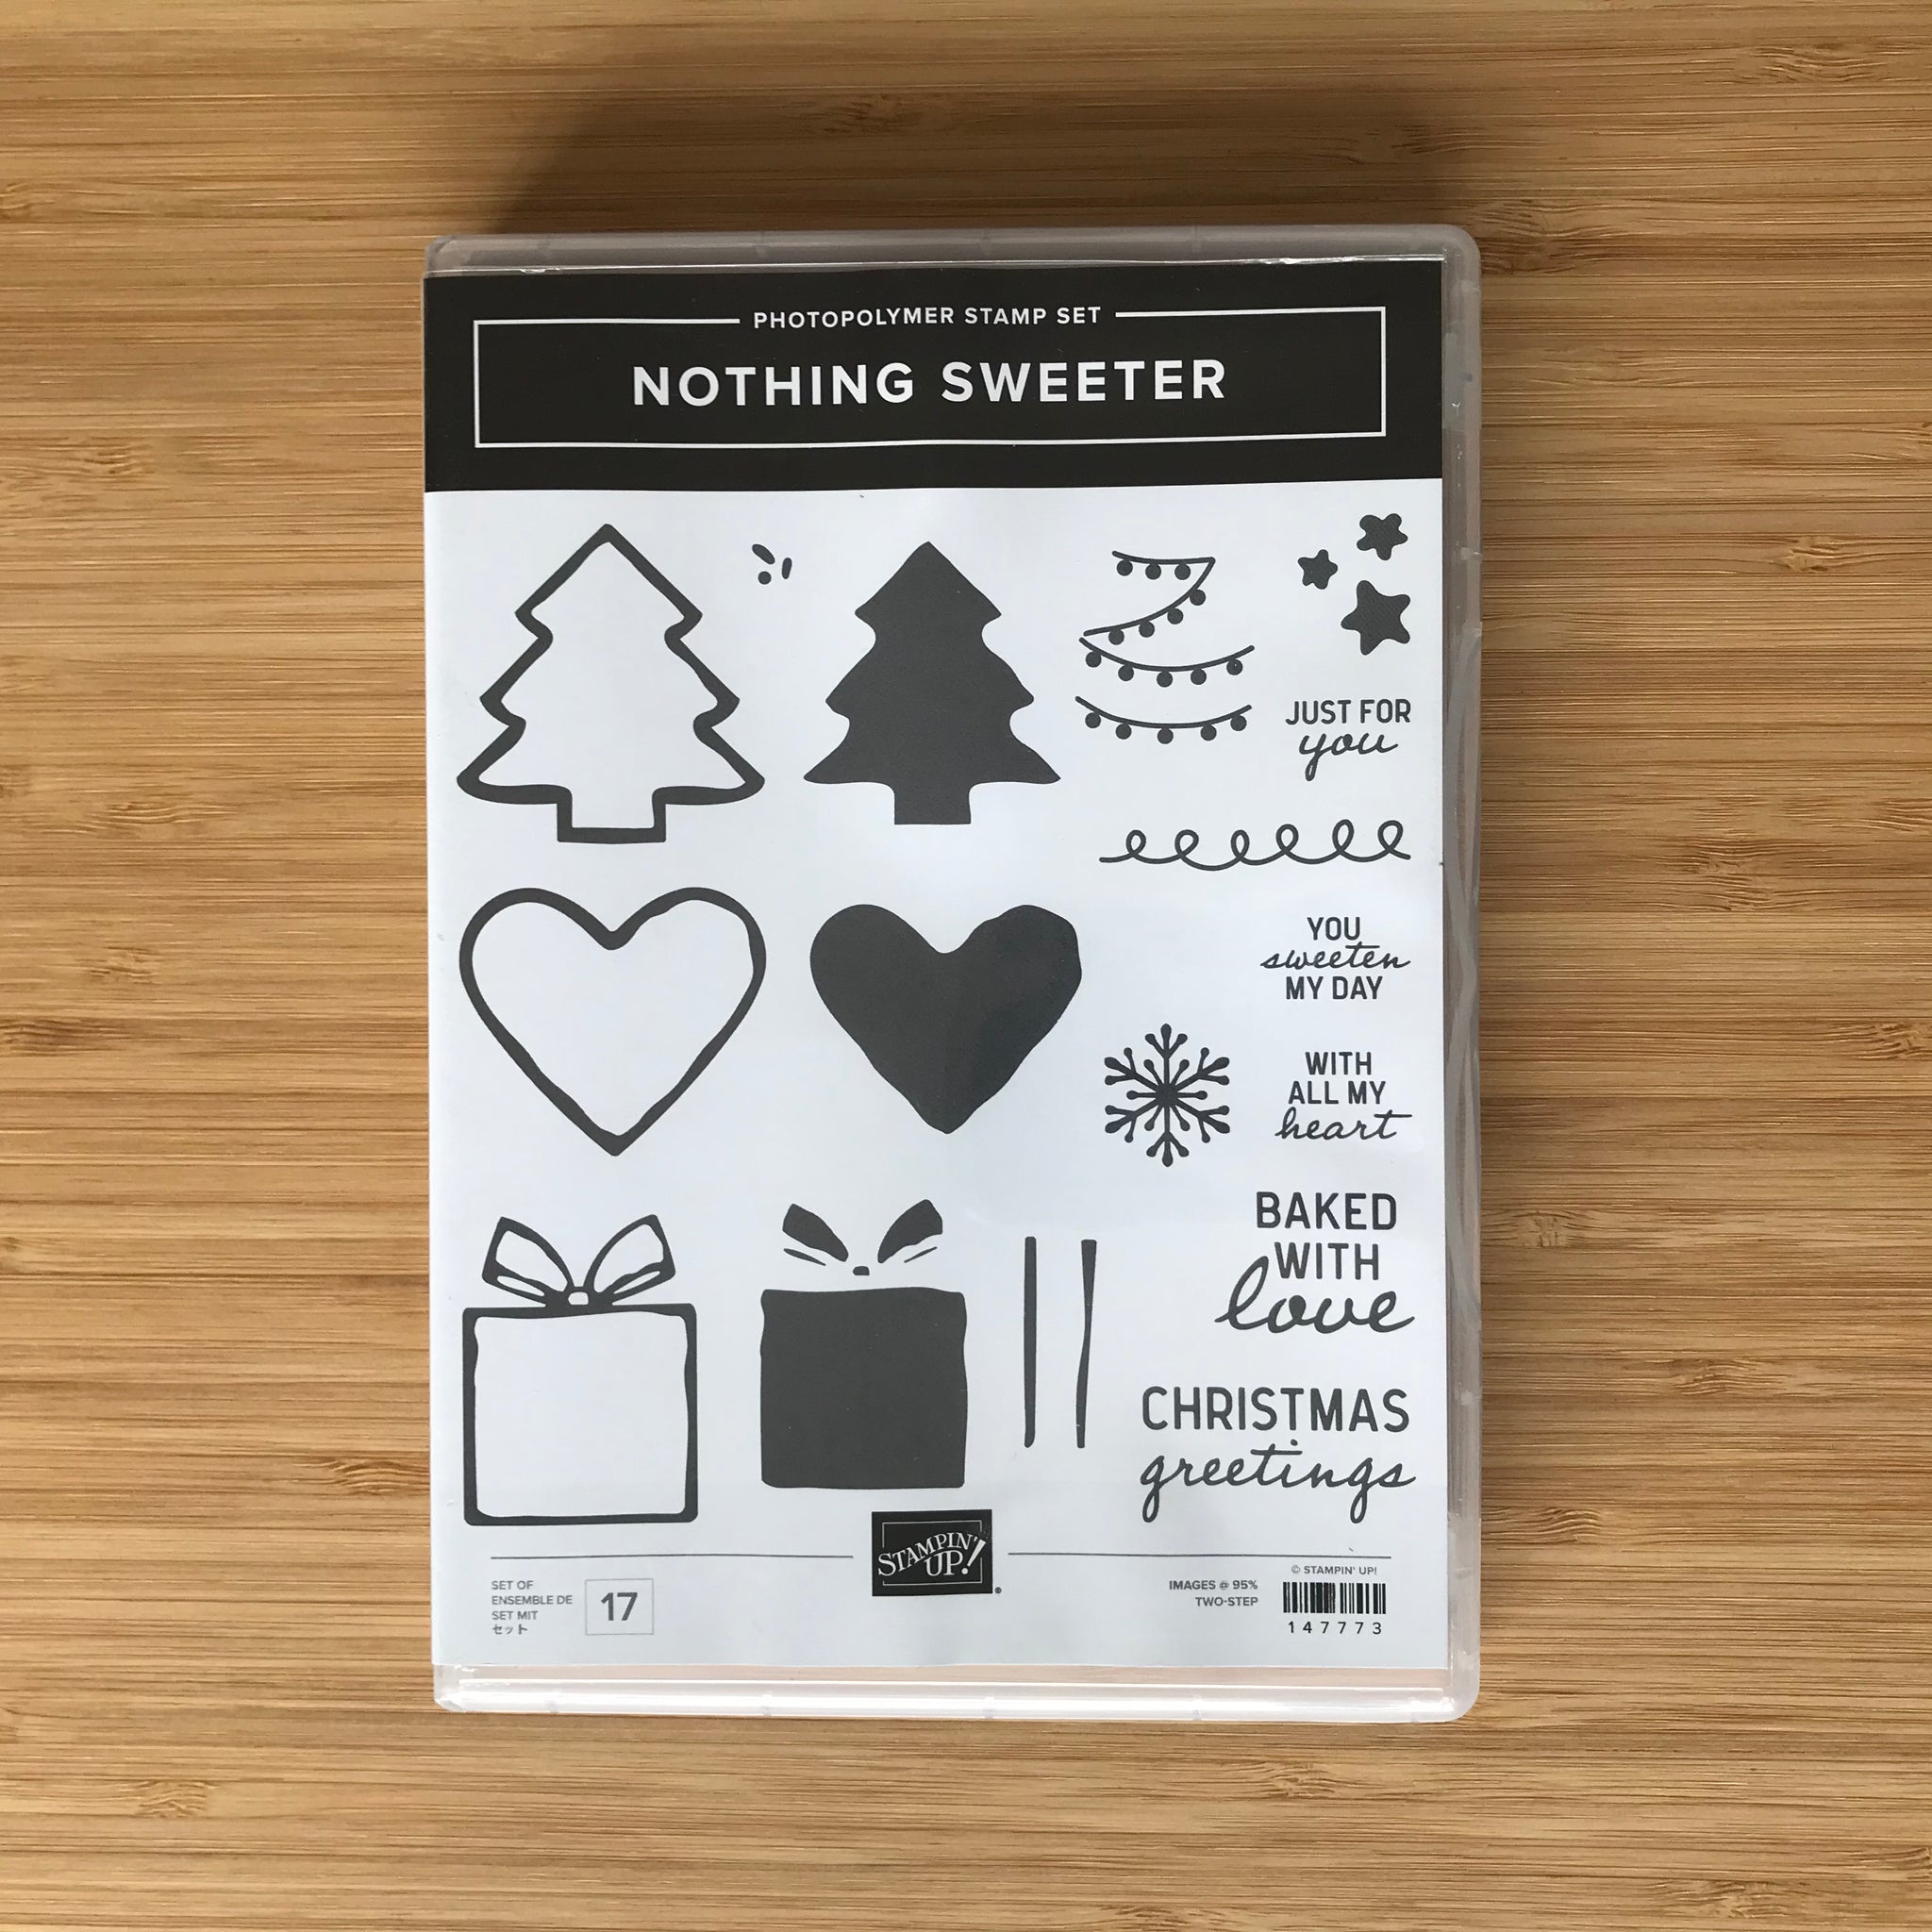 Nothing Sweeter | Retired Photopolymer Stamp Set & Dies | Stampin' Up!®